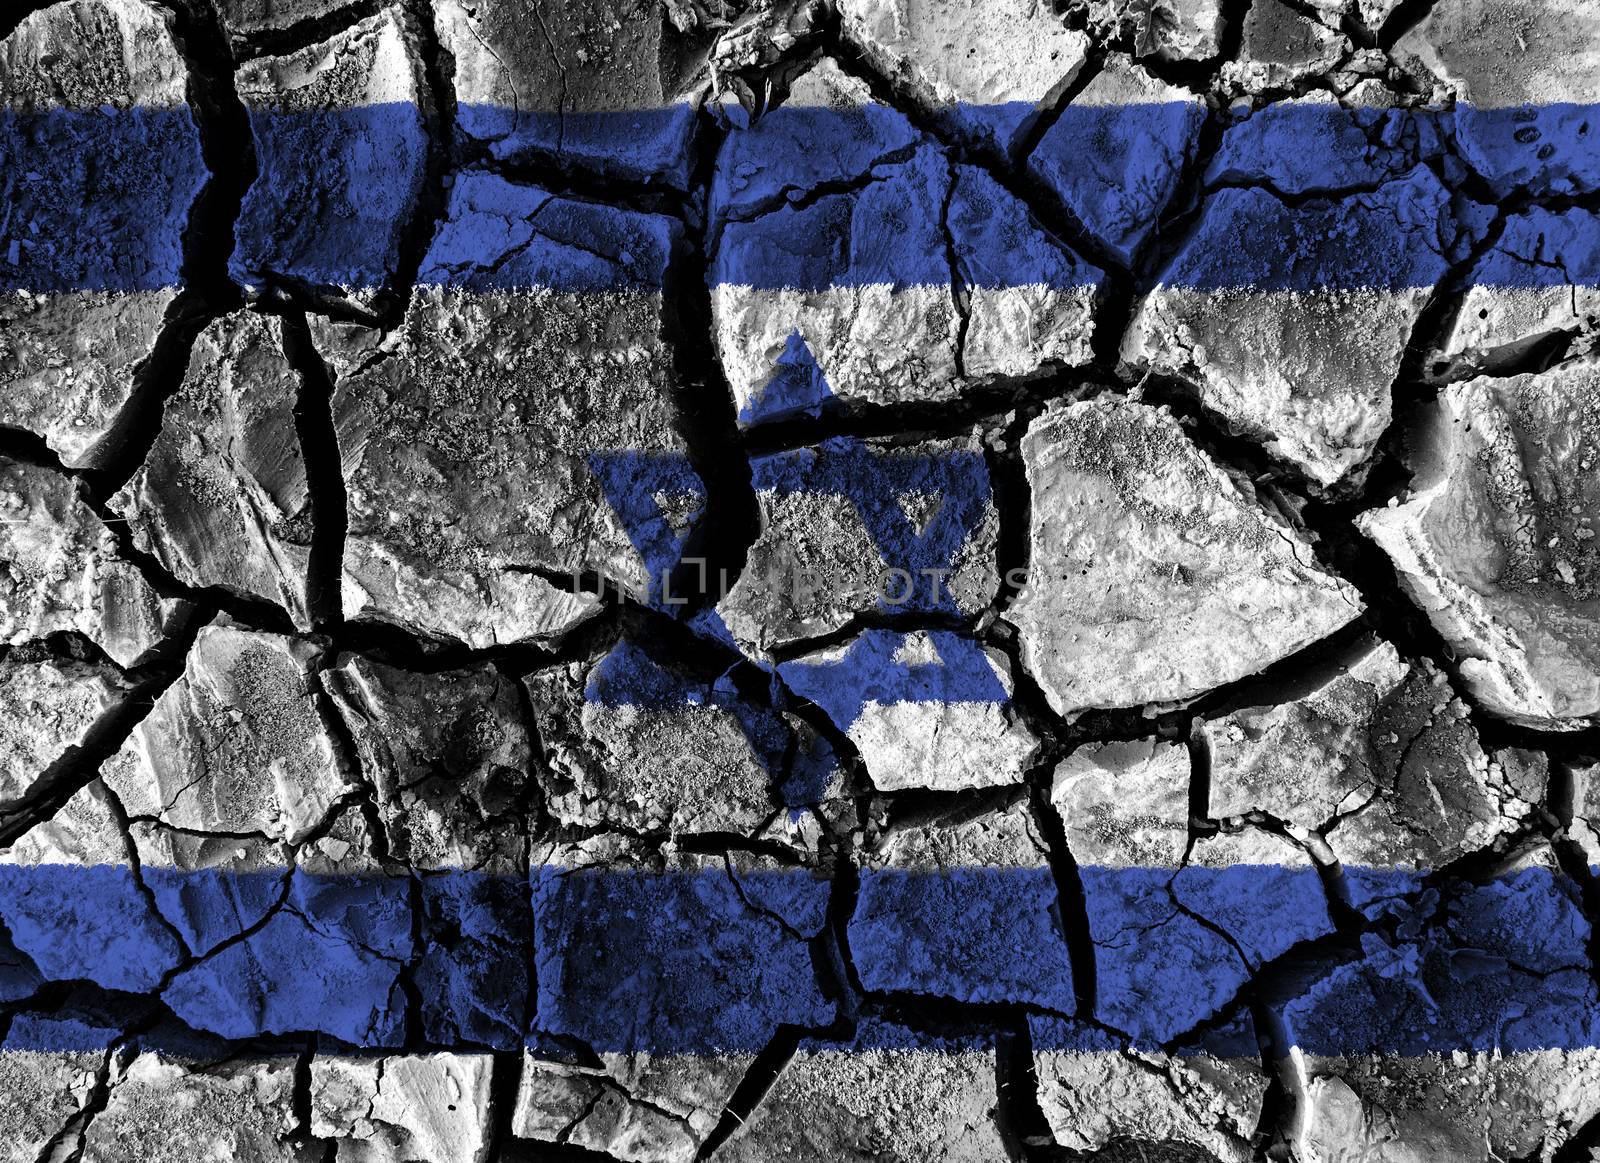 Israel flag painting on high detail cracked ground . 3D illustration .